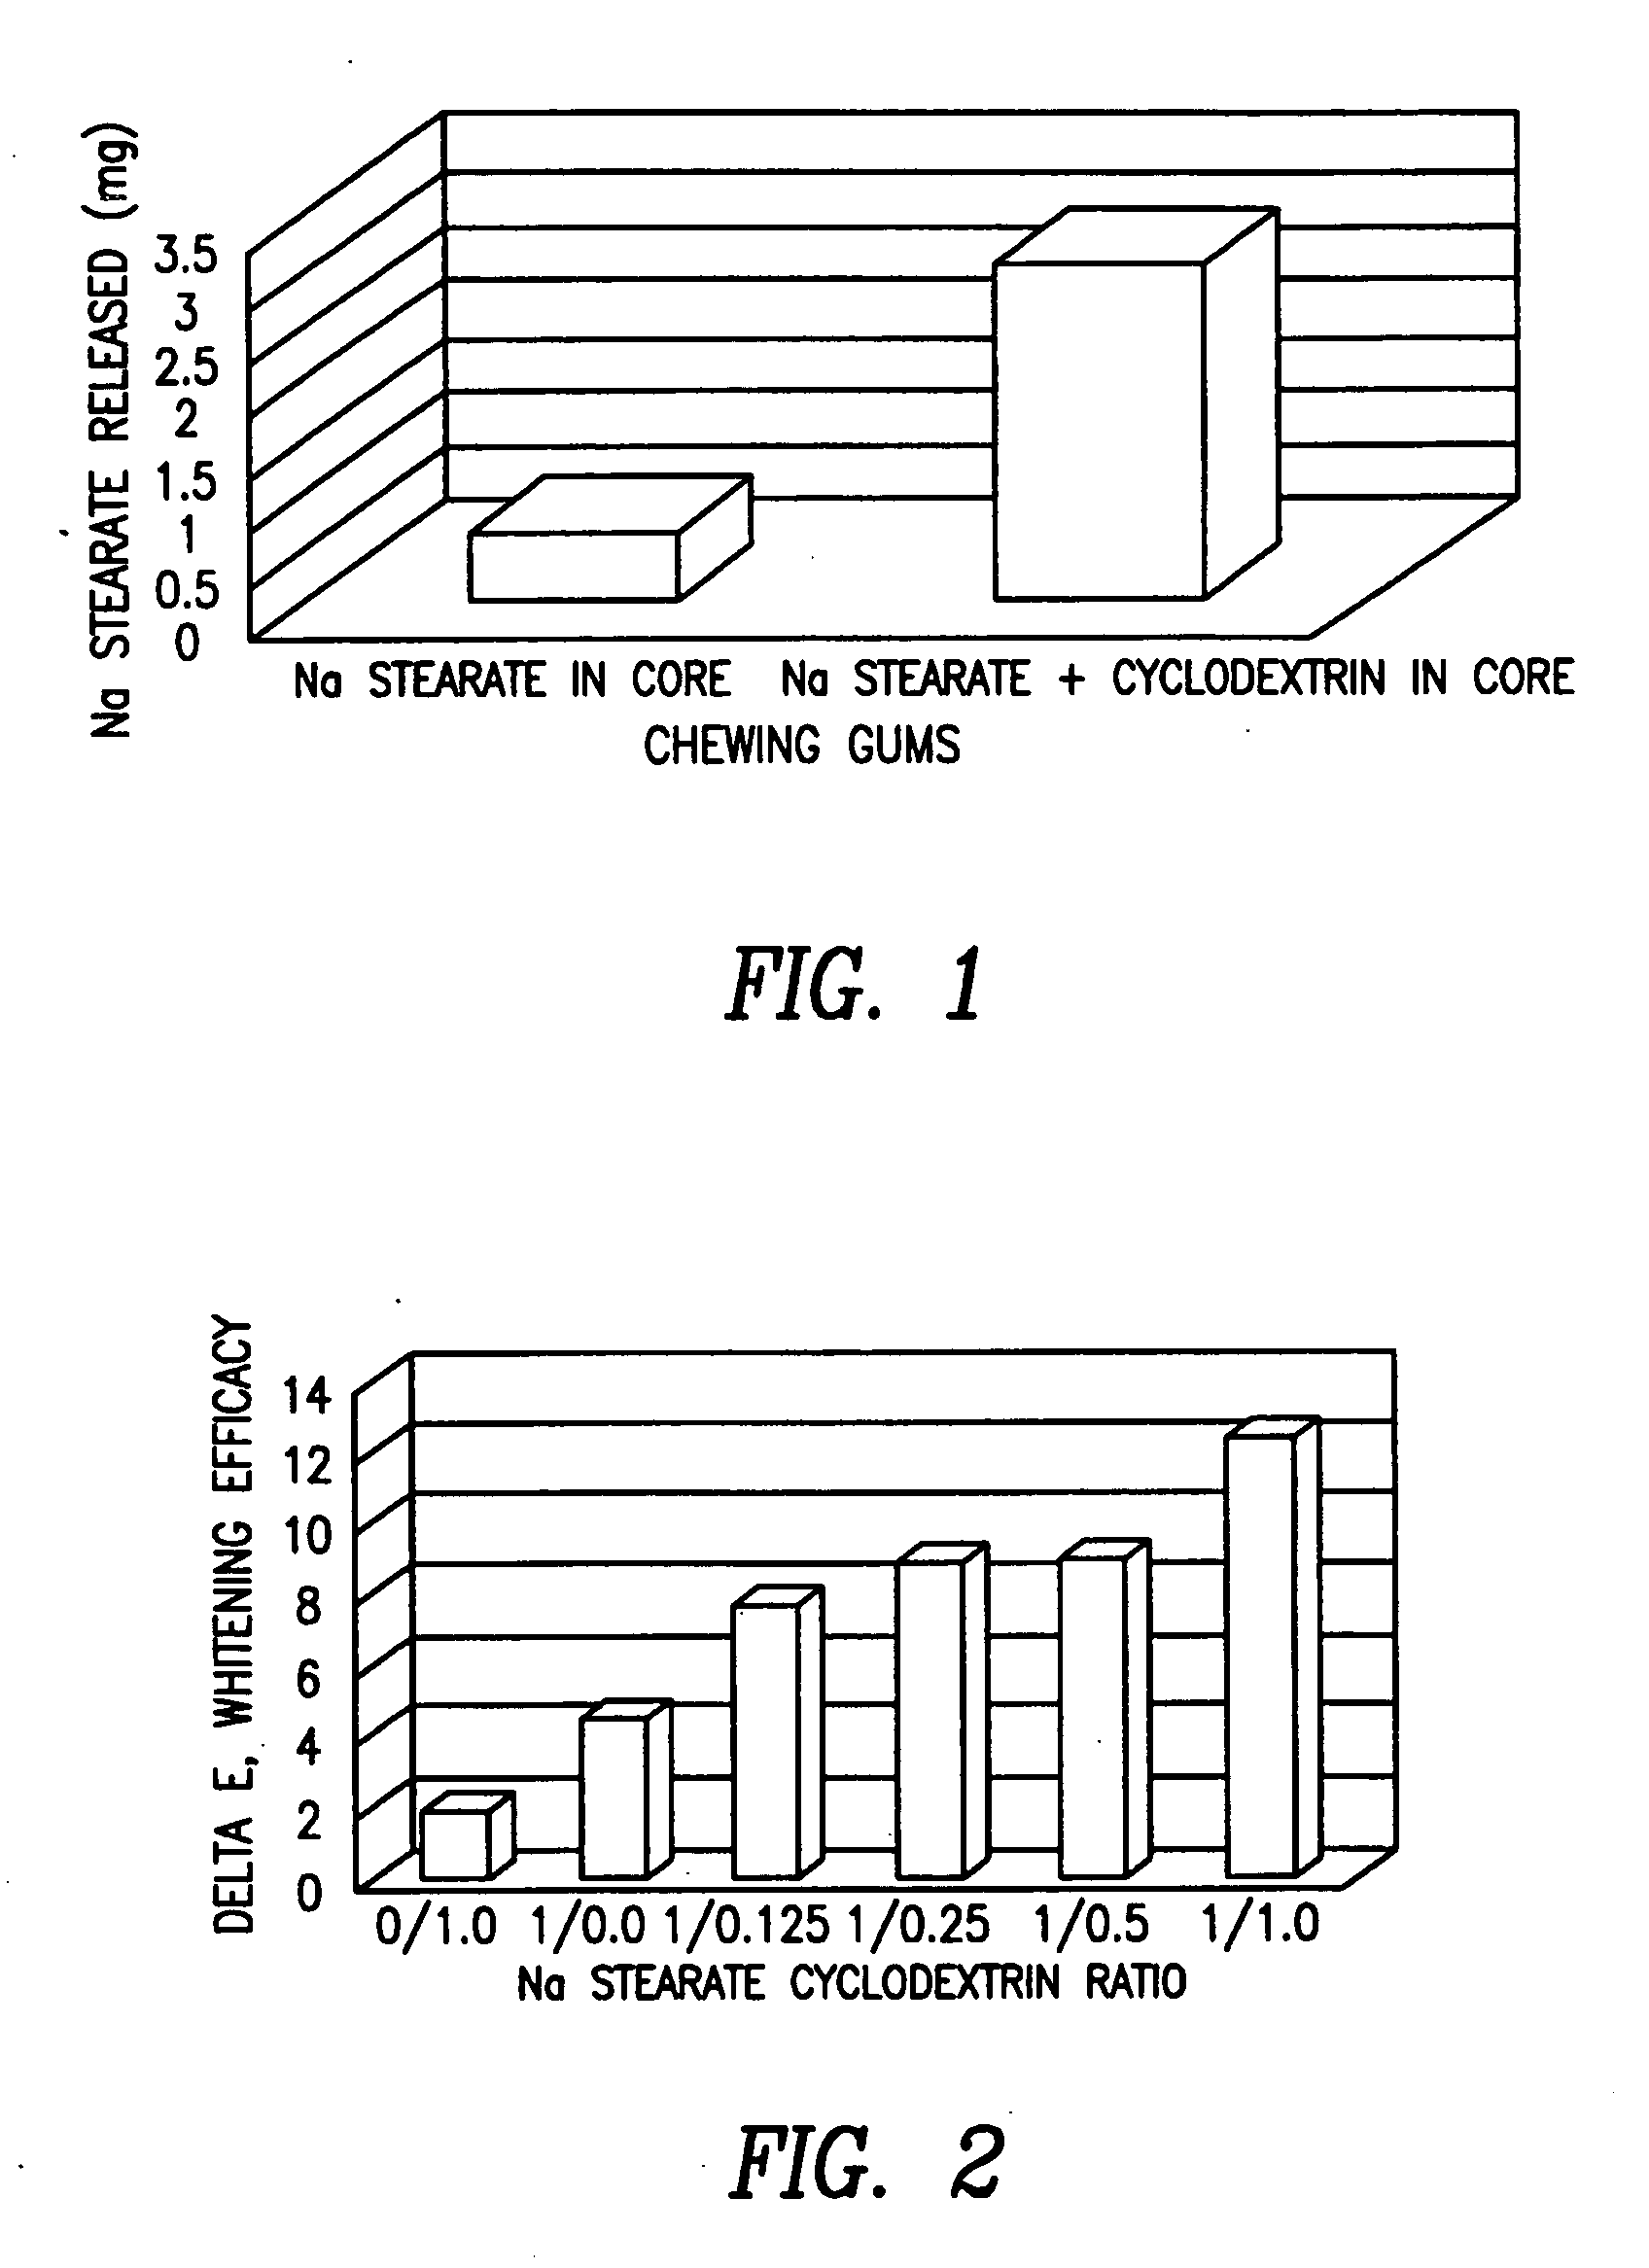 Chewing gum and confectionery compositions containing a stain removing complex, and methods of making and using the same